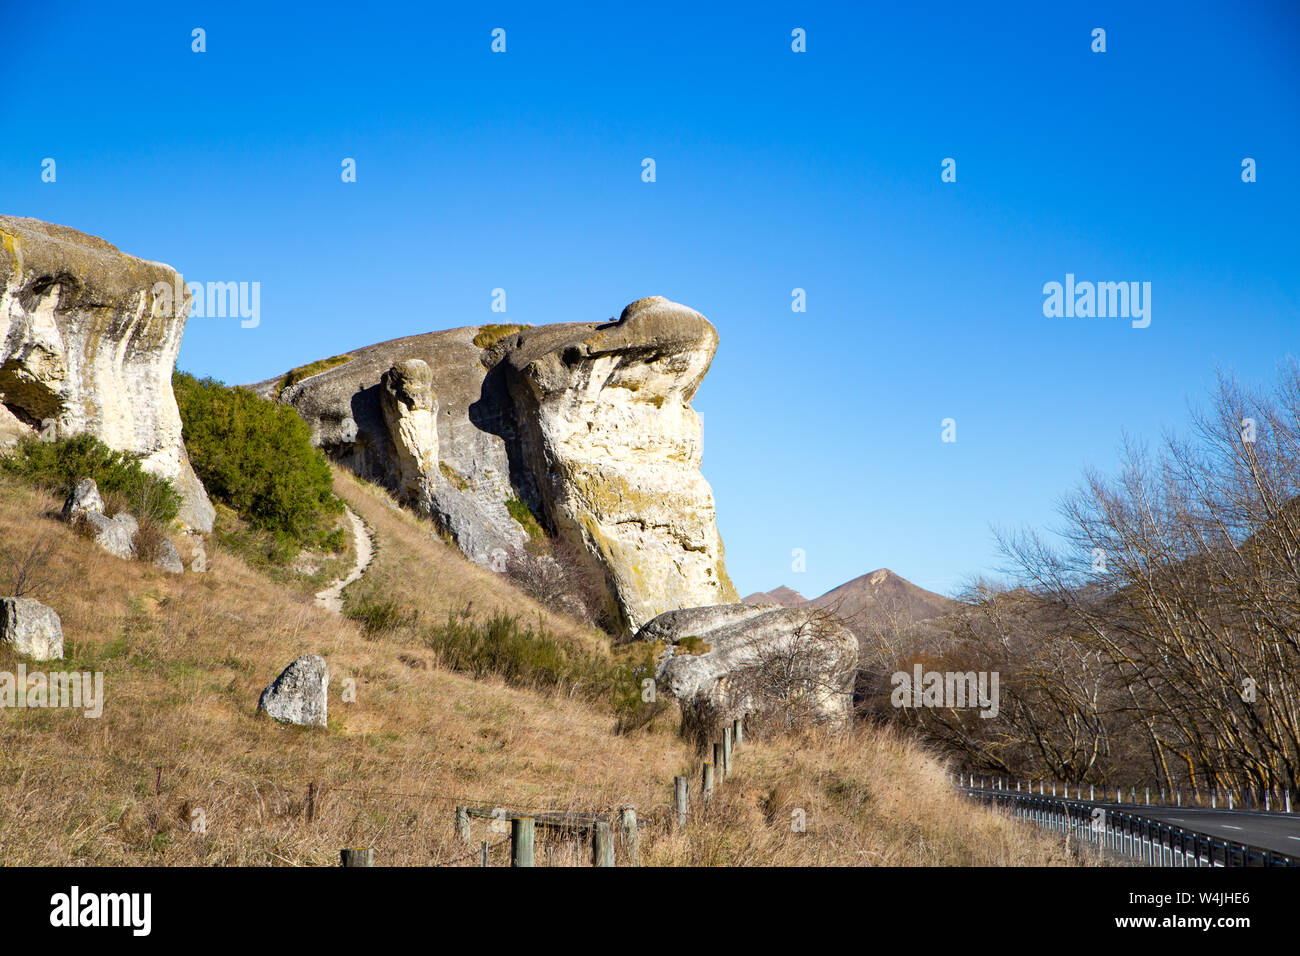 Frog Rock is a famous limestone outcrop along the Weka Pass Railway that sits above the highway through North Canterbury, New Zealand Stock Photo